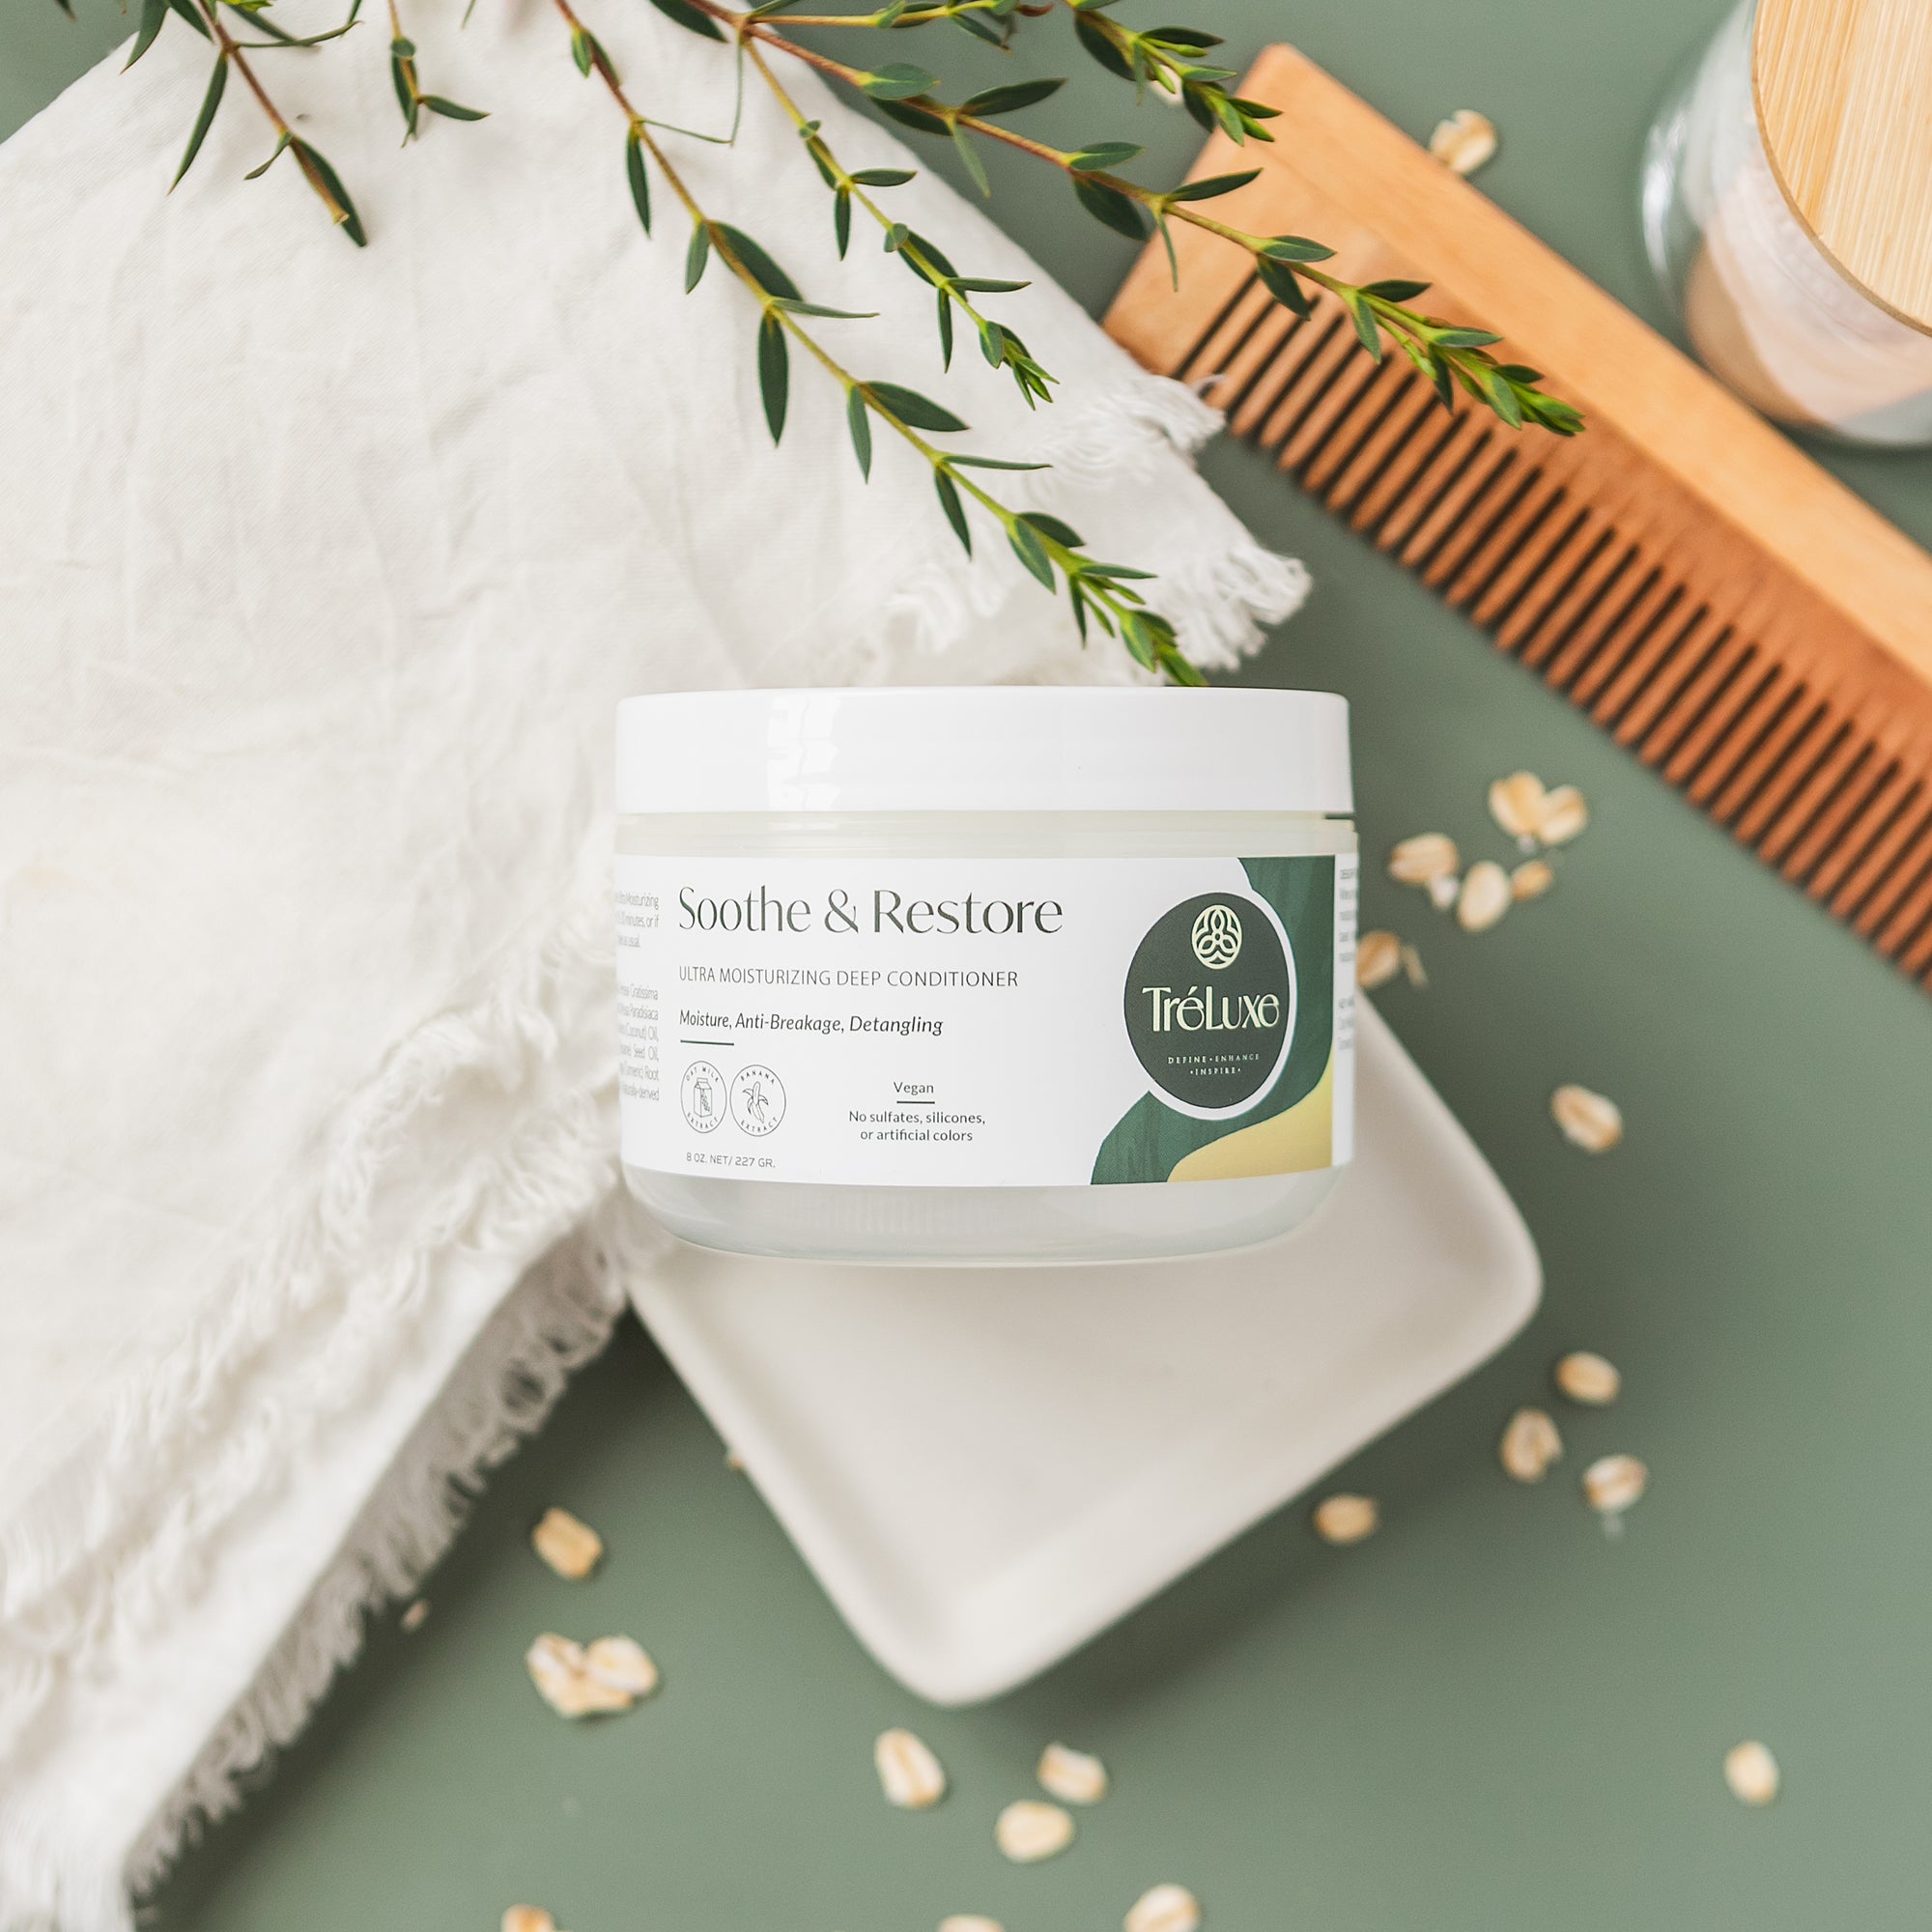 Soothe and Restore Ultra Moisturizing Deep Conditioner